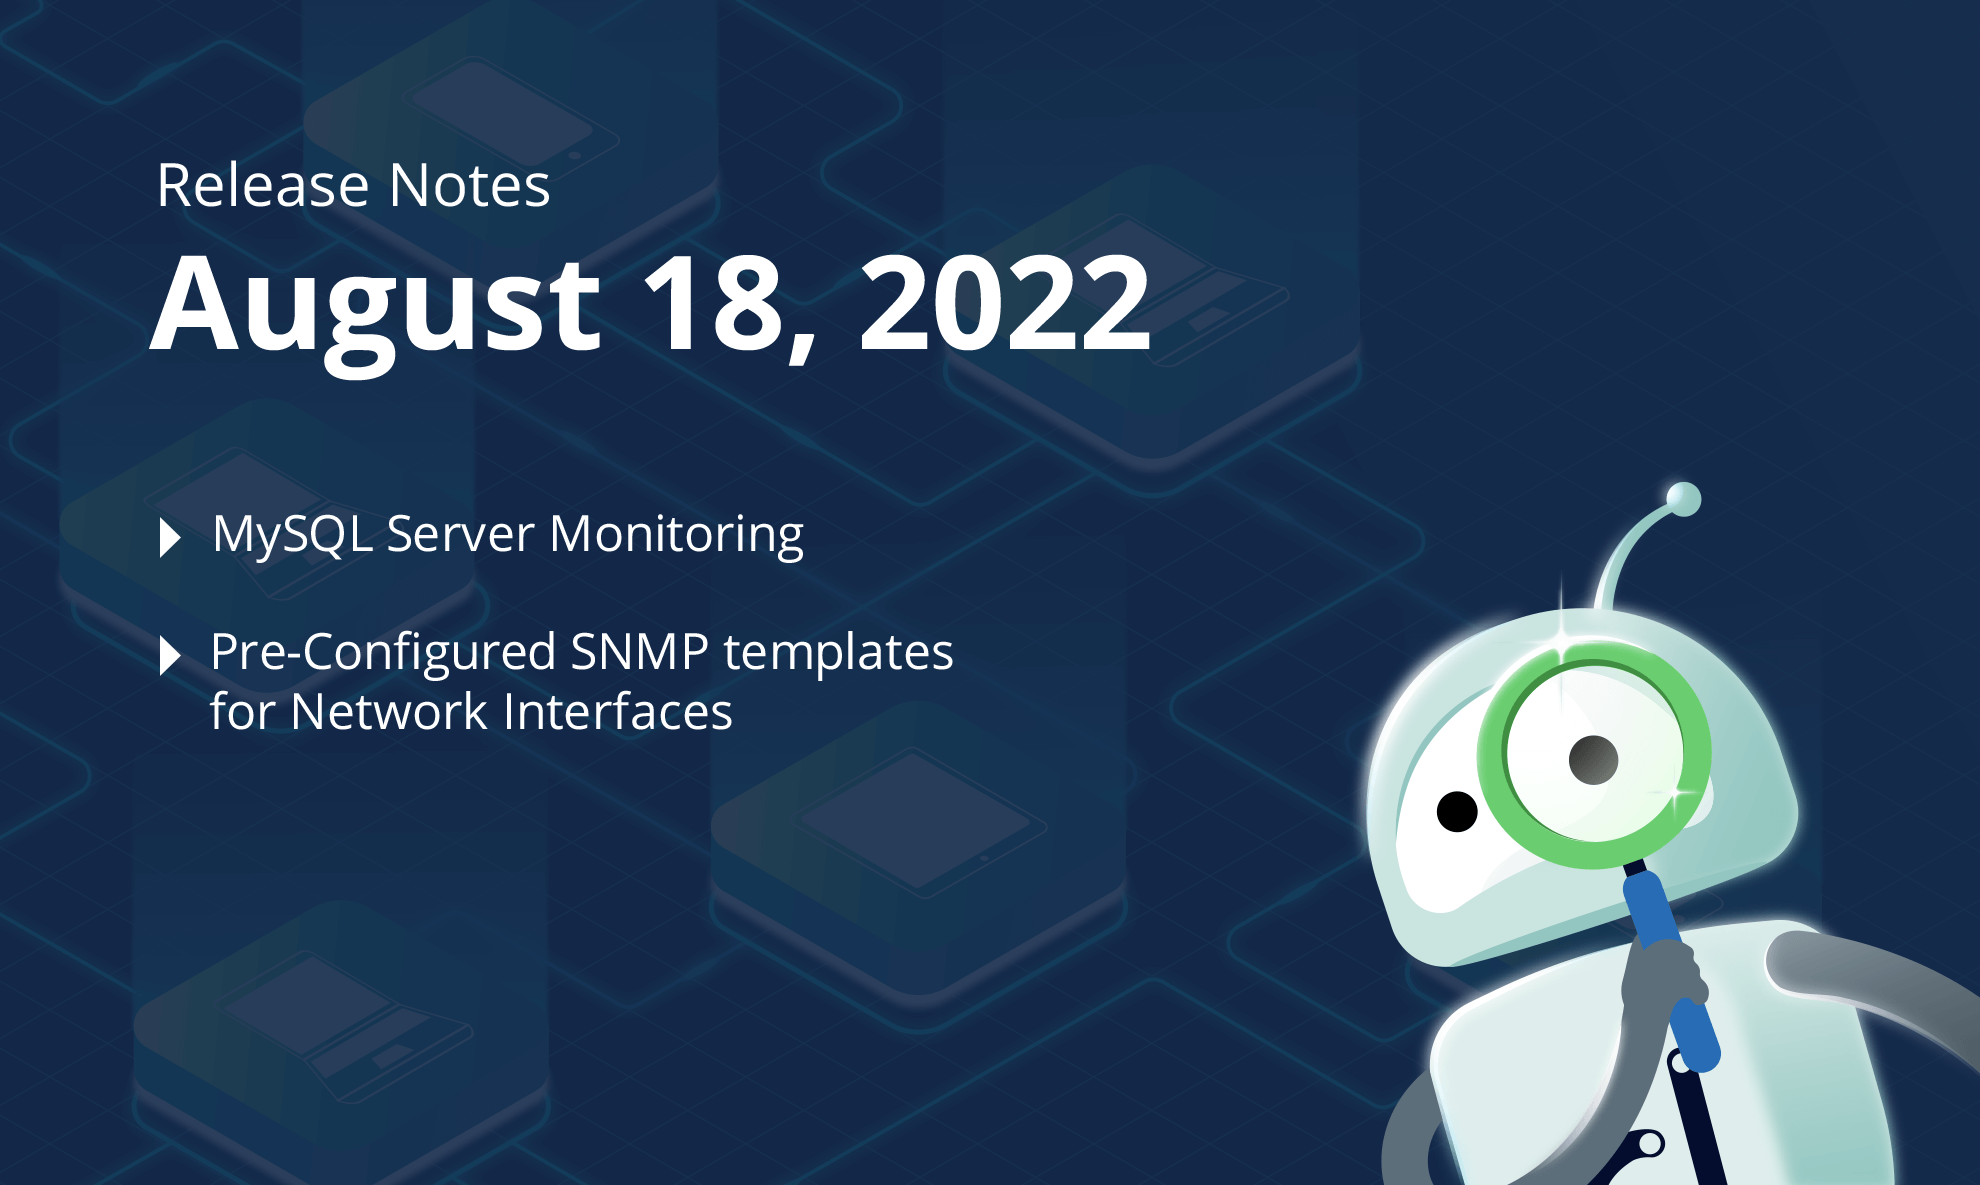 August 18, 2022 – MySQL Server Monitoring, Pre-Configured SNMP templates for Network Interfaces